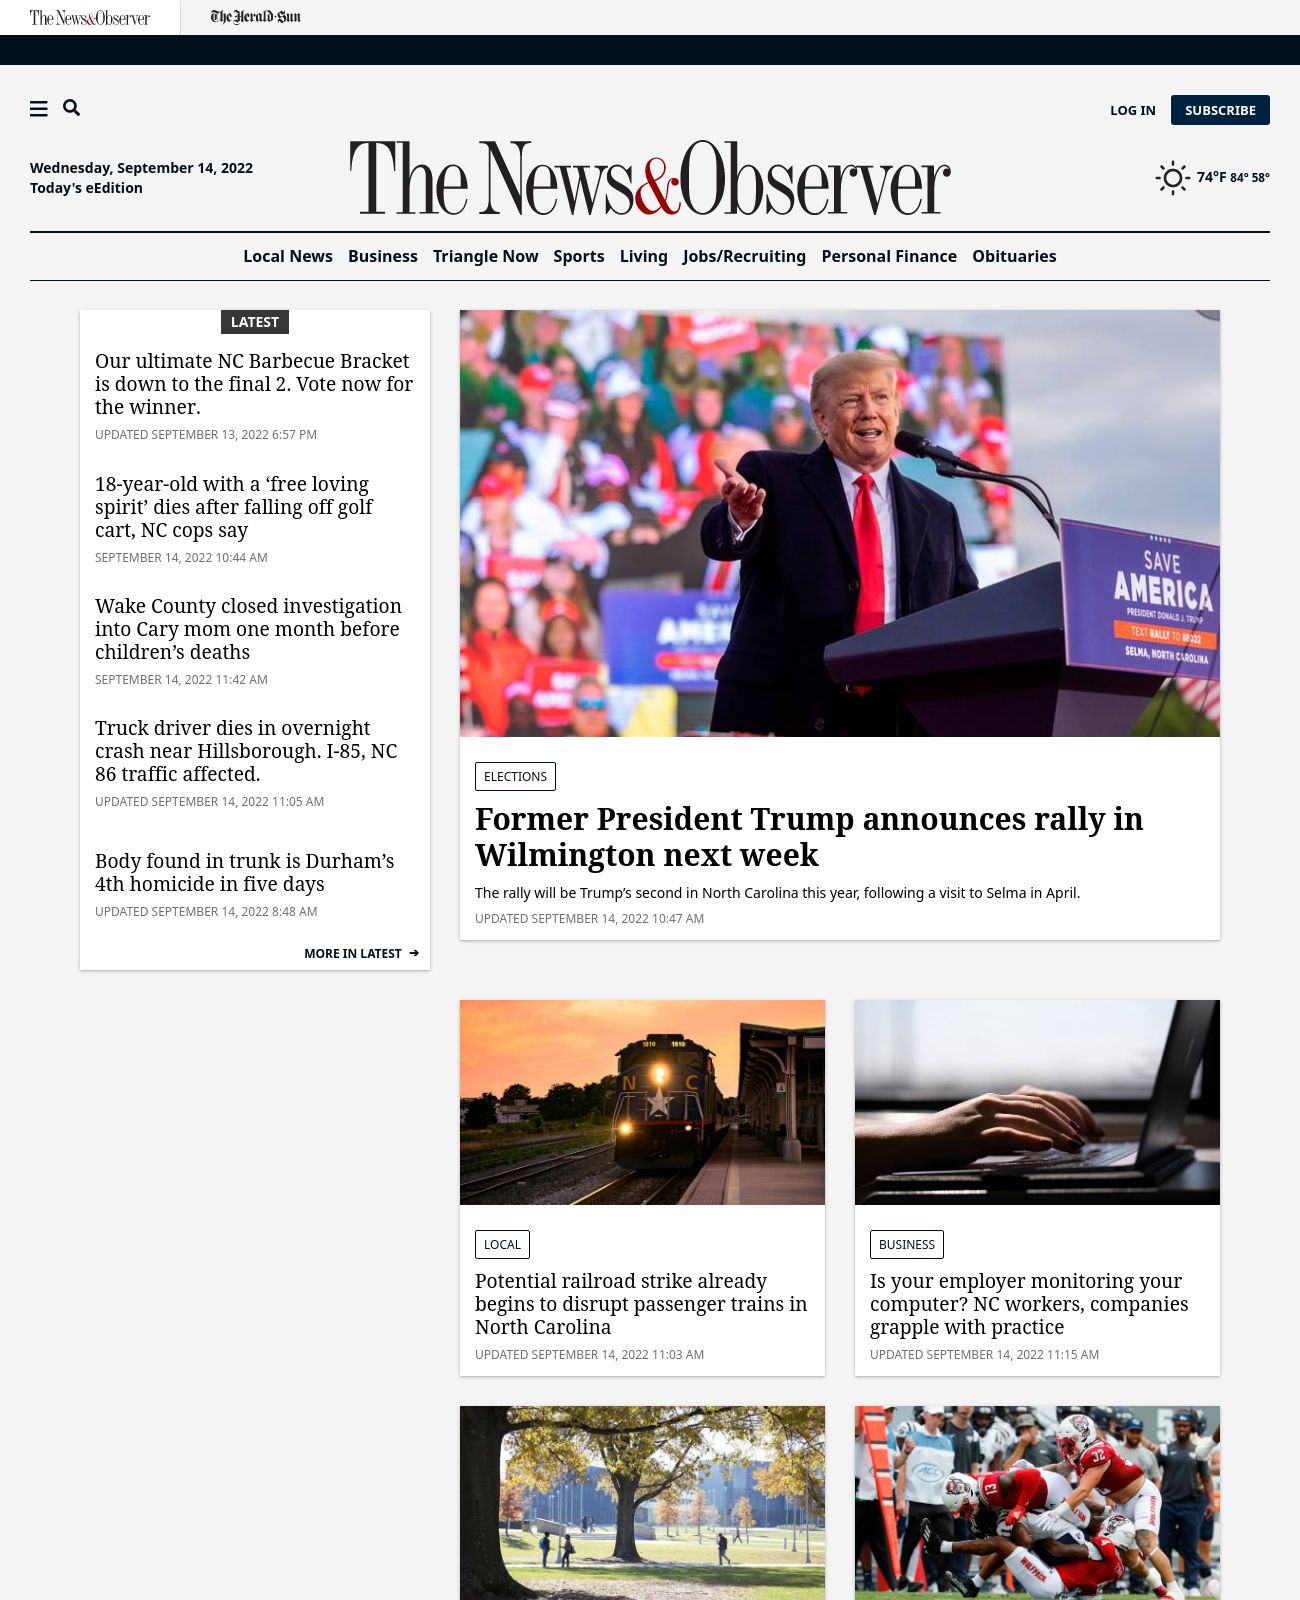 News & Observer at 2022-09-14 12:27:32-04:00 local time